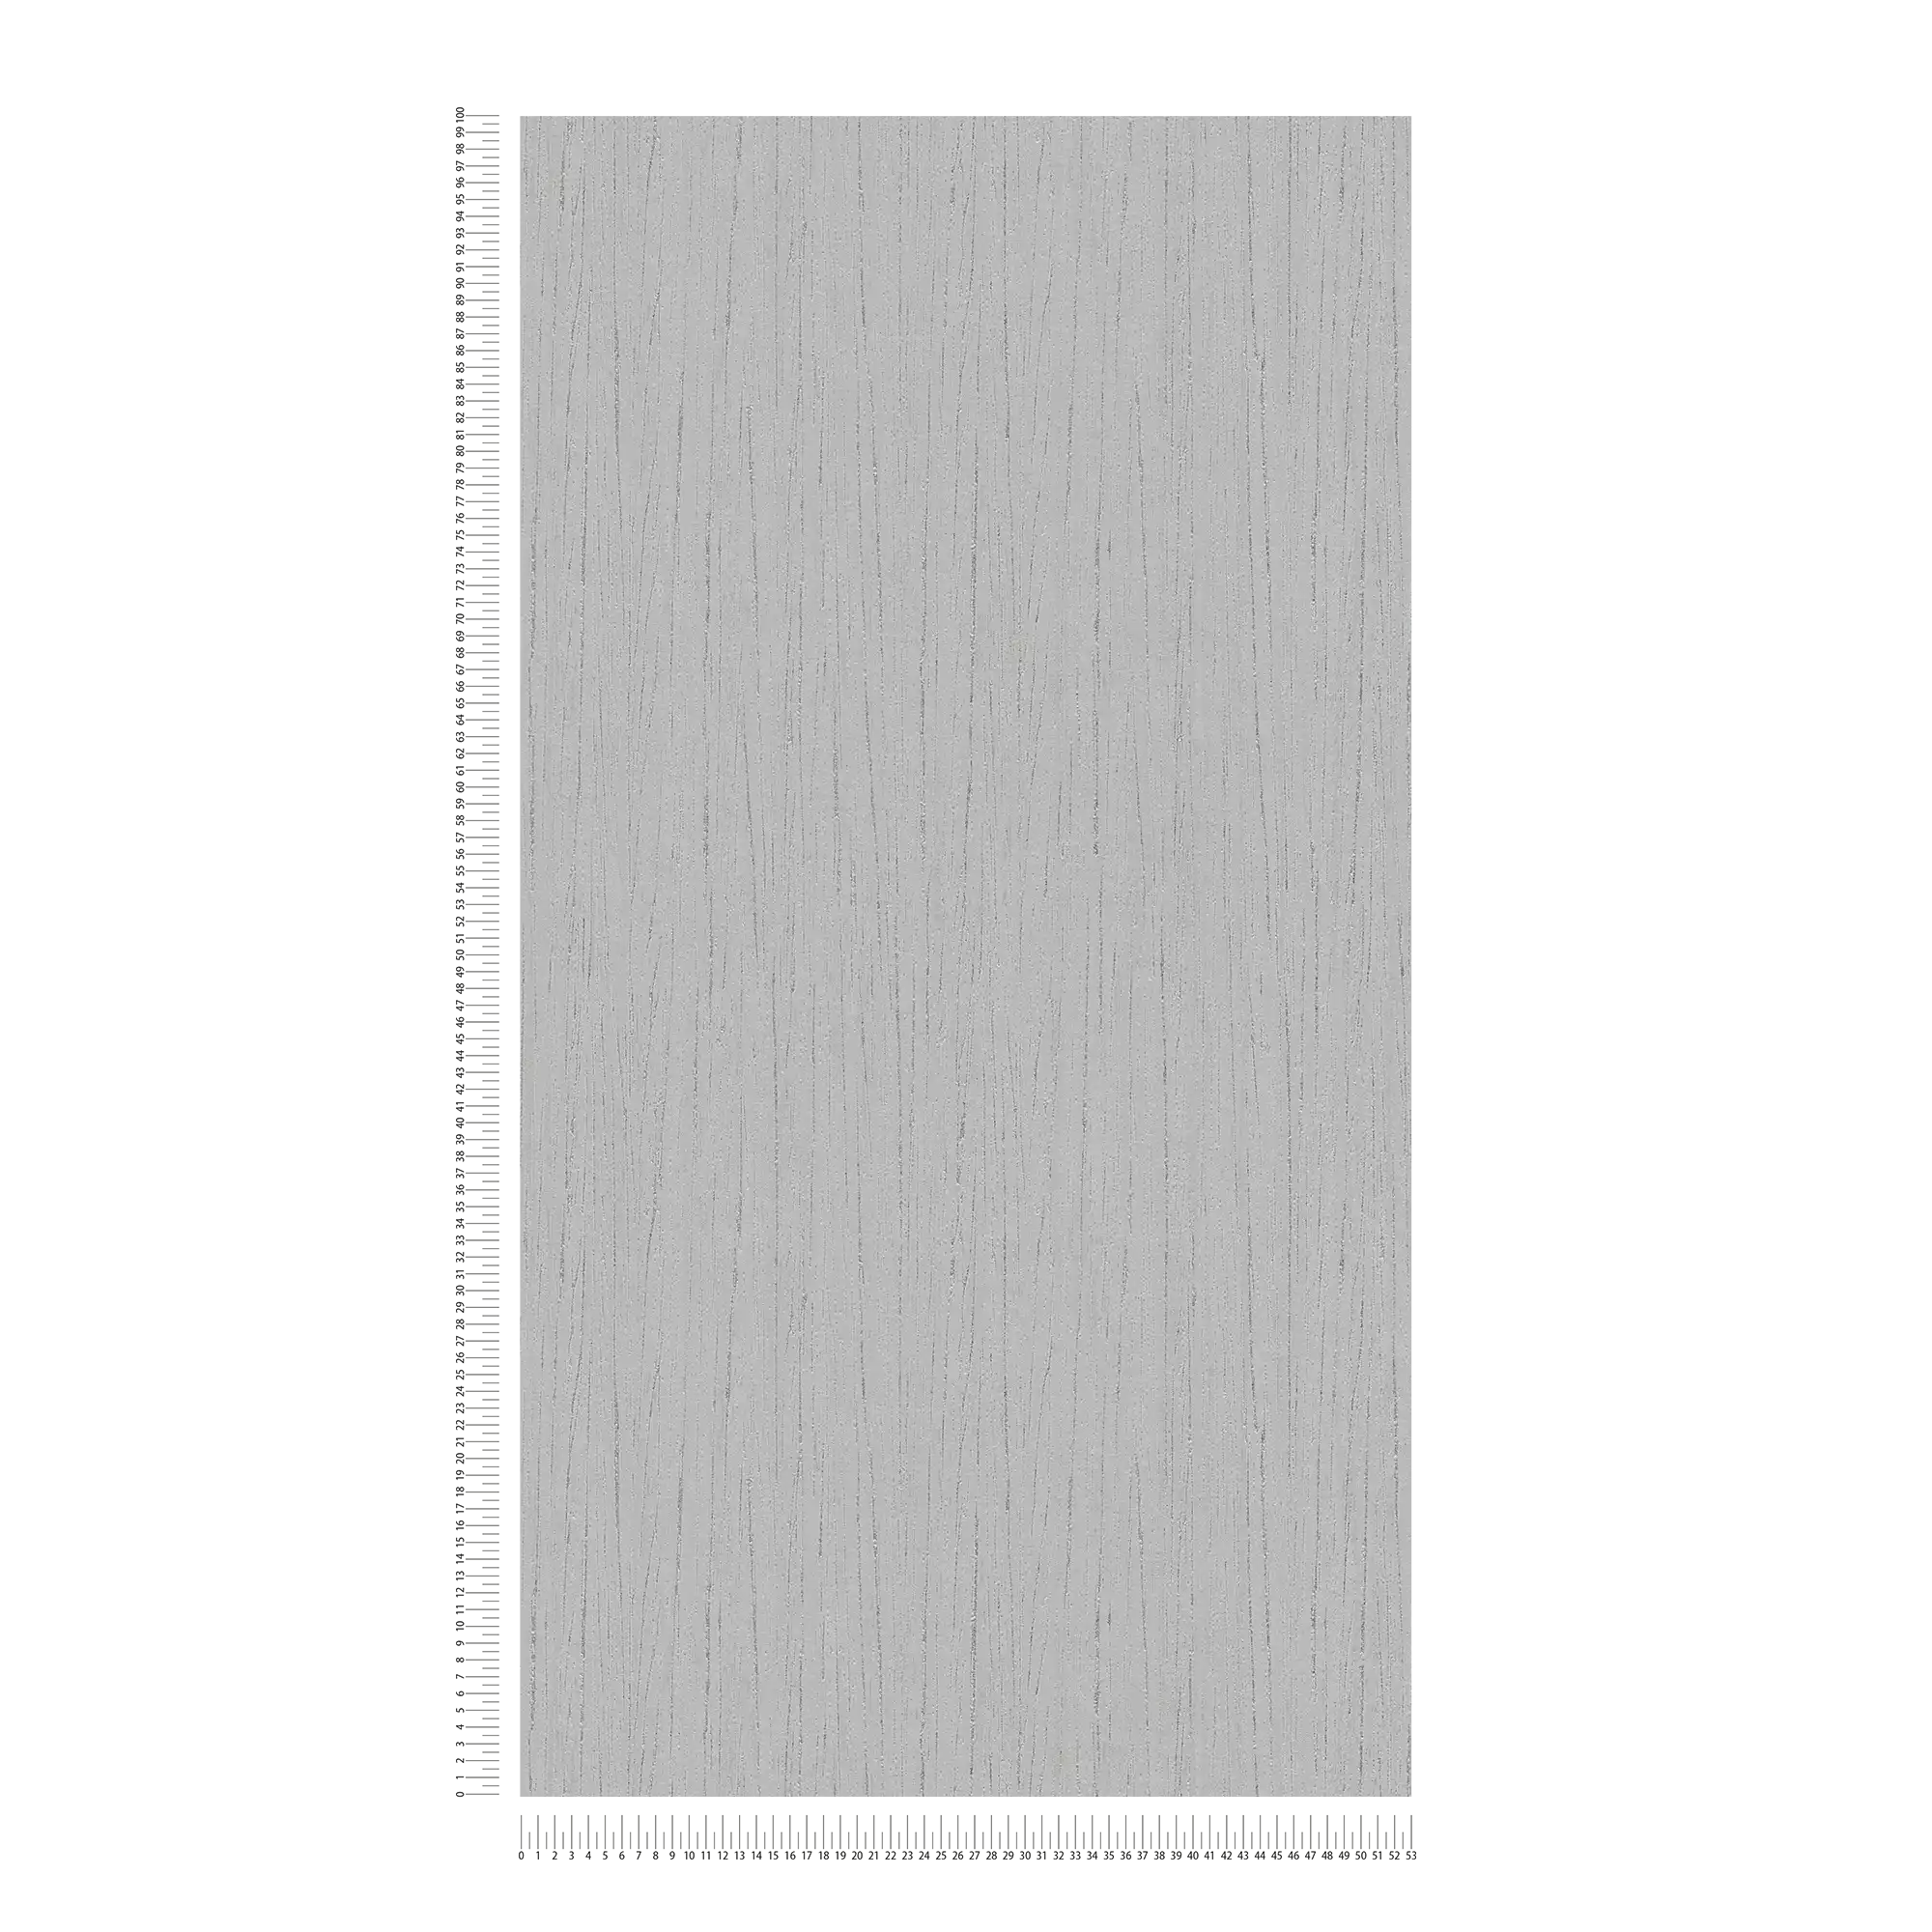             Wallpaper dove grey with texture & colour effect - grey
        